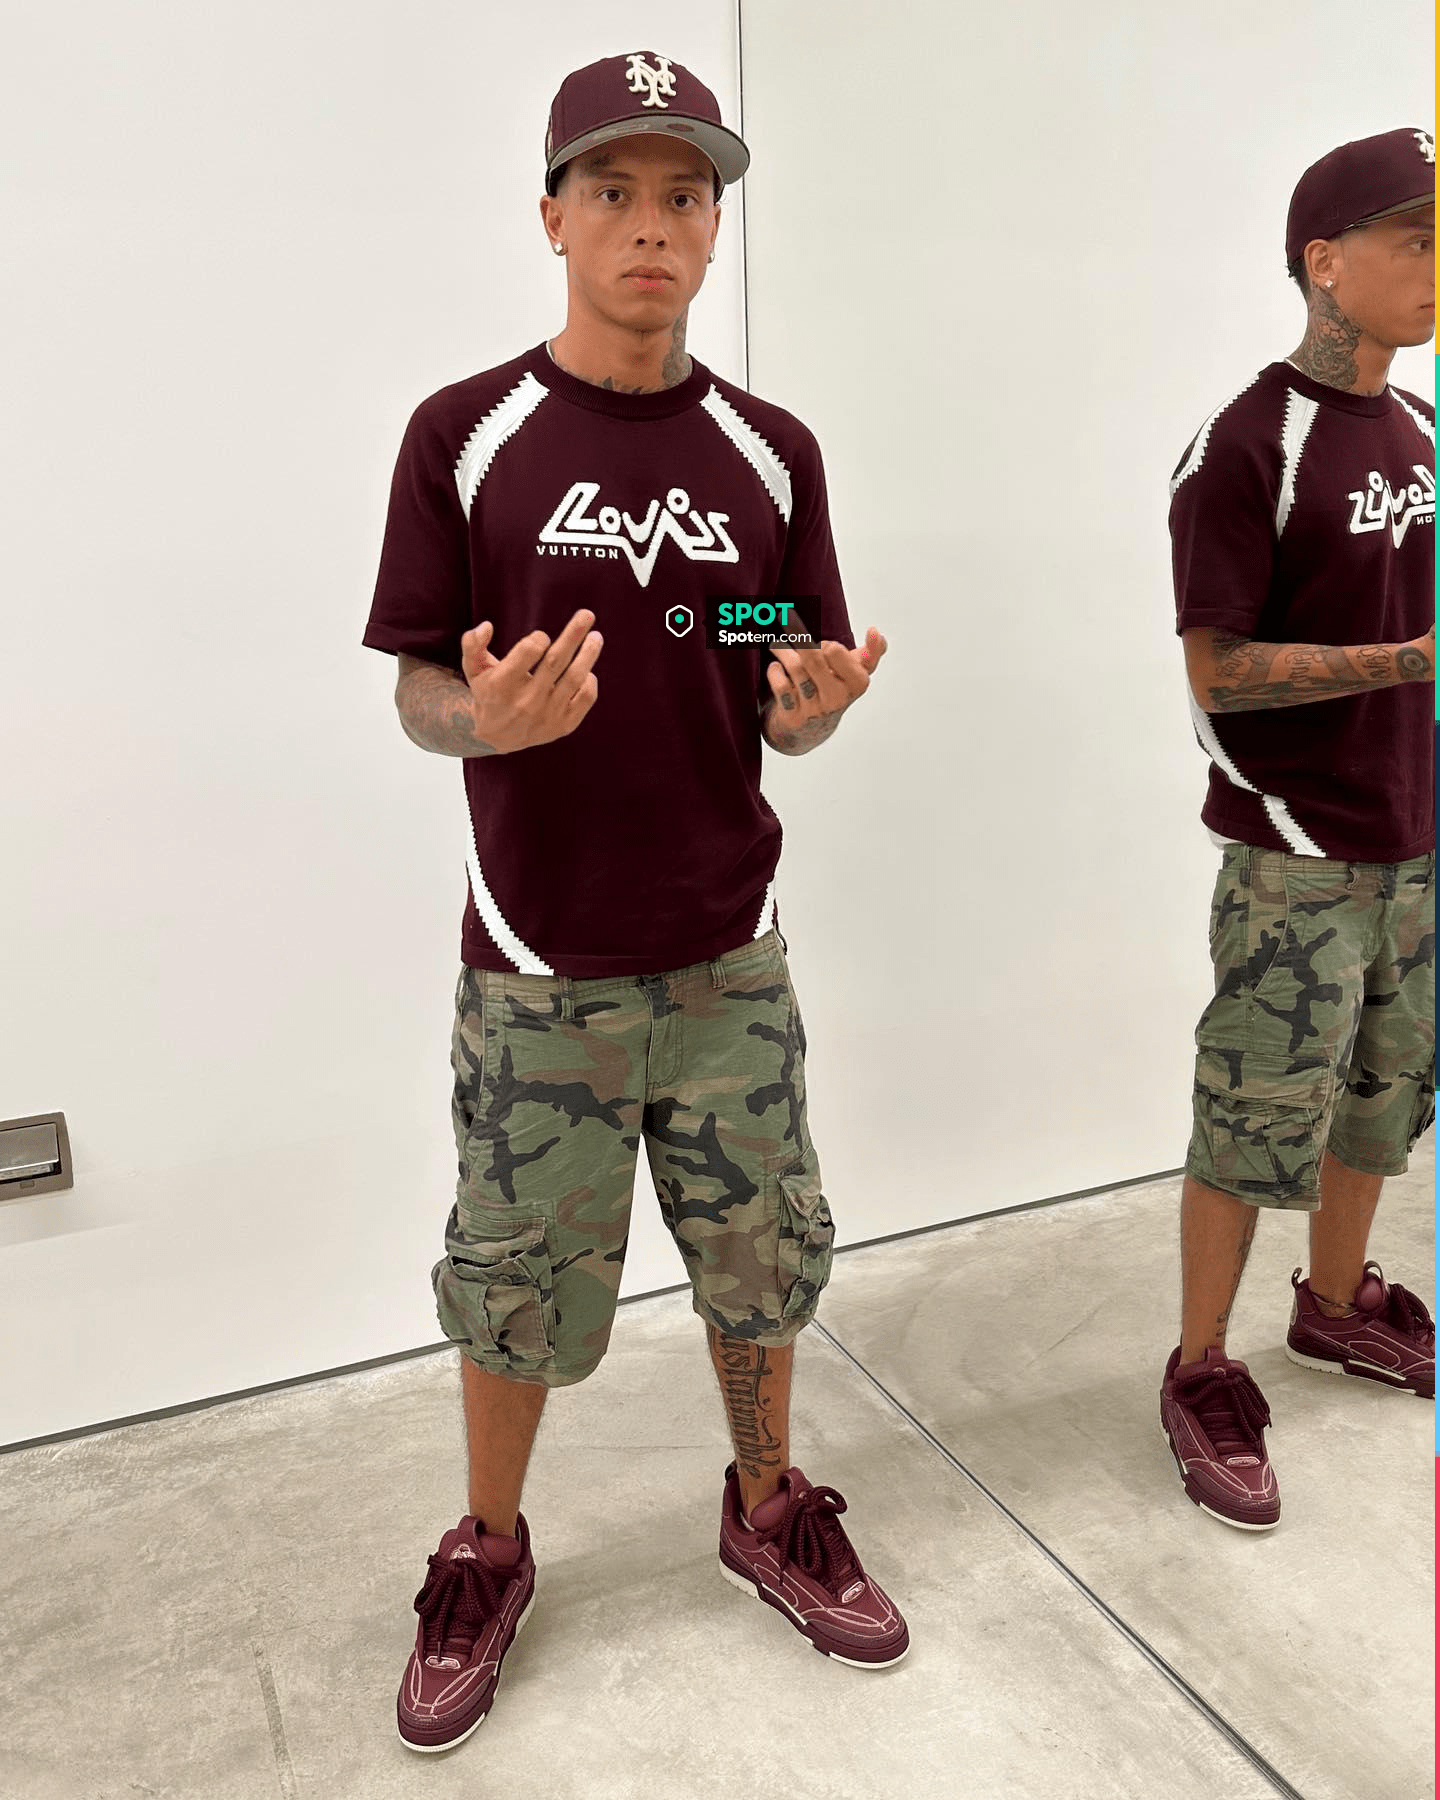 Louis Vuitton Burgundy Logo Knit T-Shirt worn by Central Cee on his  Instagram account @centralcee